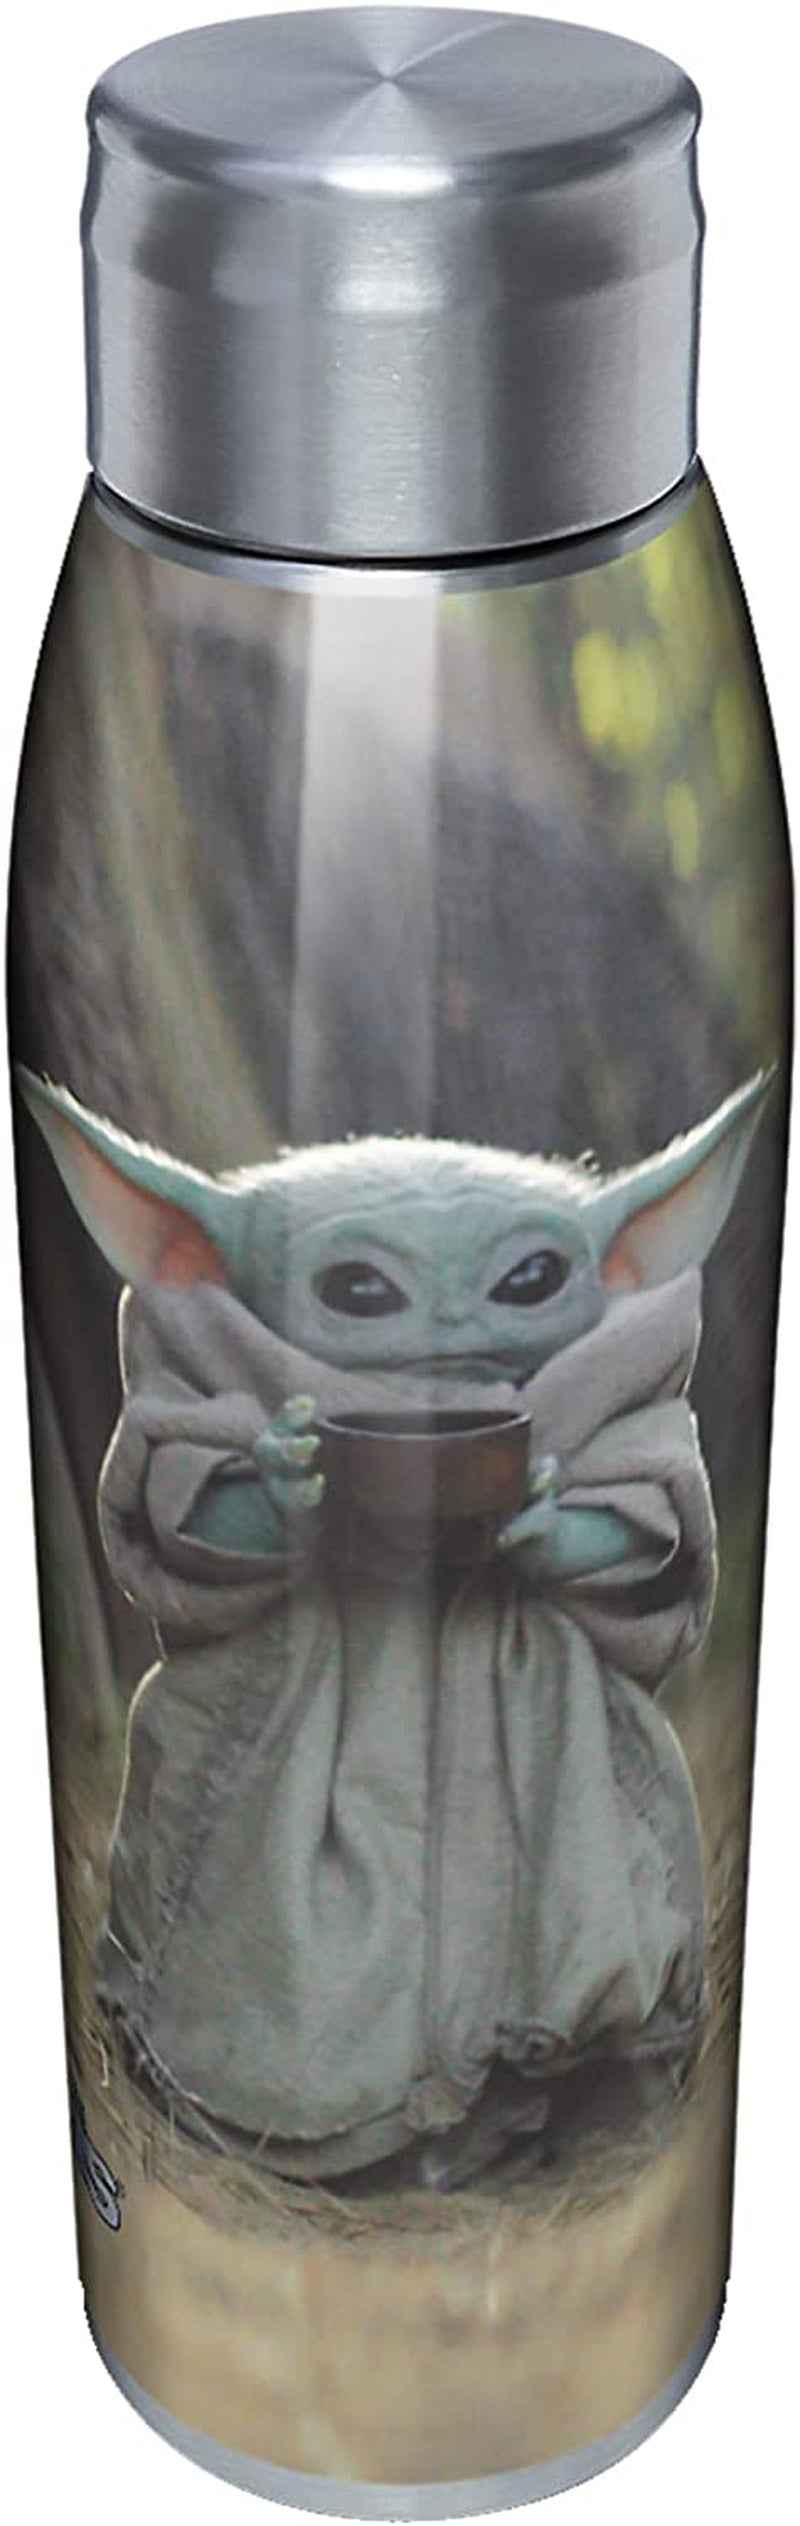 Tervis Made in USA Double Walled Star Wars - the Mandalorian Child Sipping Insulated Tumbler Cup Keeps Drinks Cold & Hot, 16Oz, Clear Home & Garden > Kitchen & Dining > Tableware > Drinkware Tervis Stainless Steel 17oz Water Bottle - Stainless Steel 